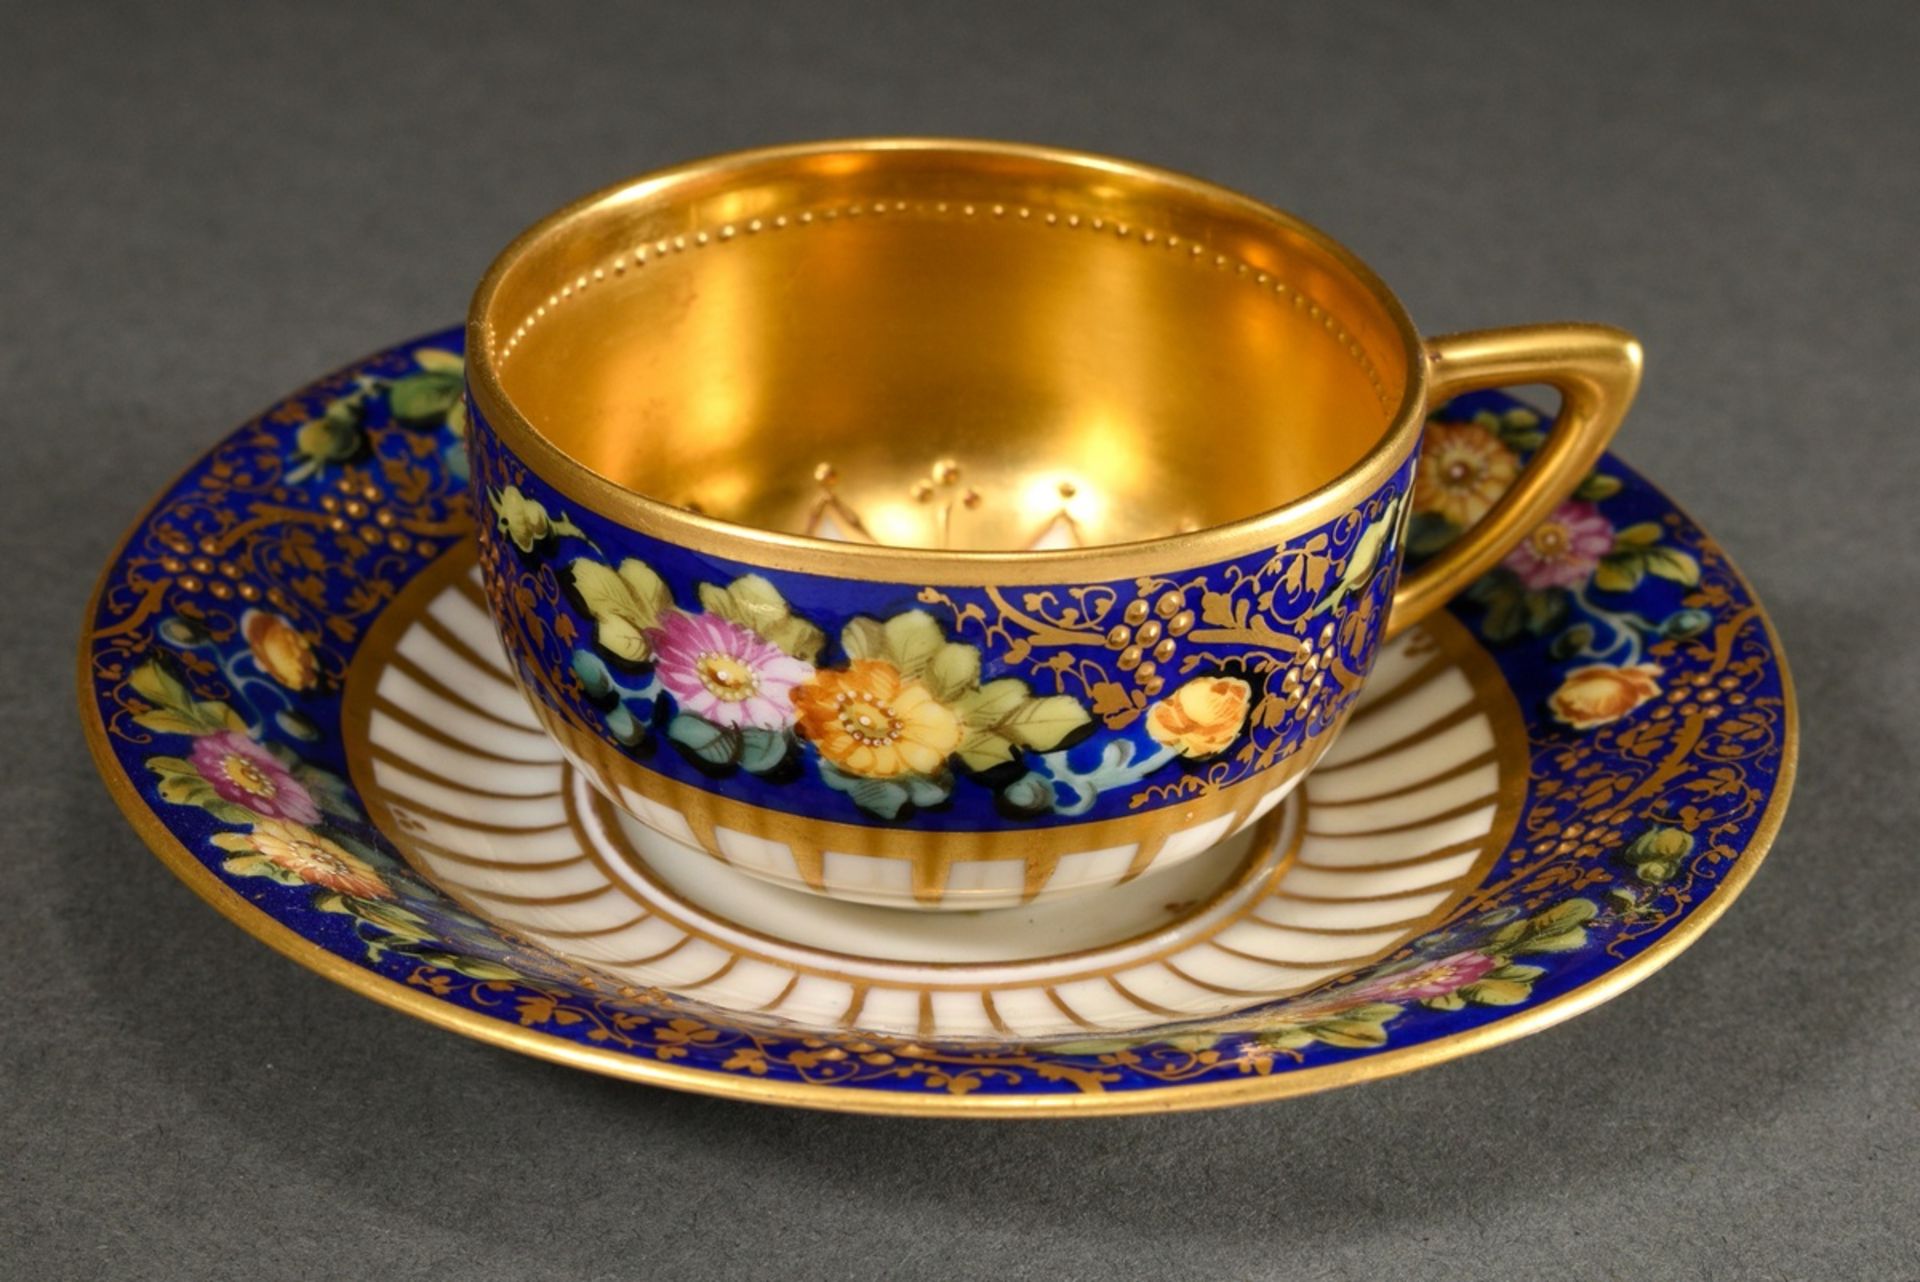 Magnificent demitasse cups/saucers with polychrome floral painting and pastose gold decoration on a - Image 2 of 5